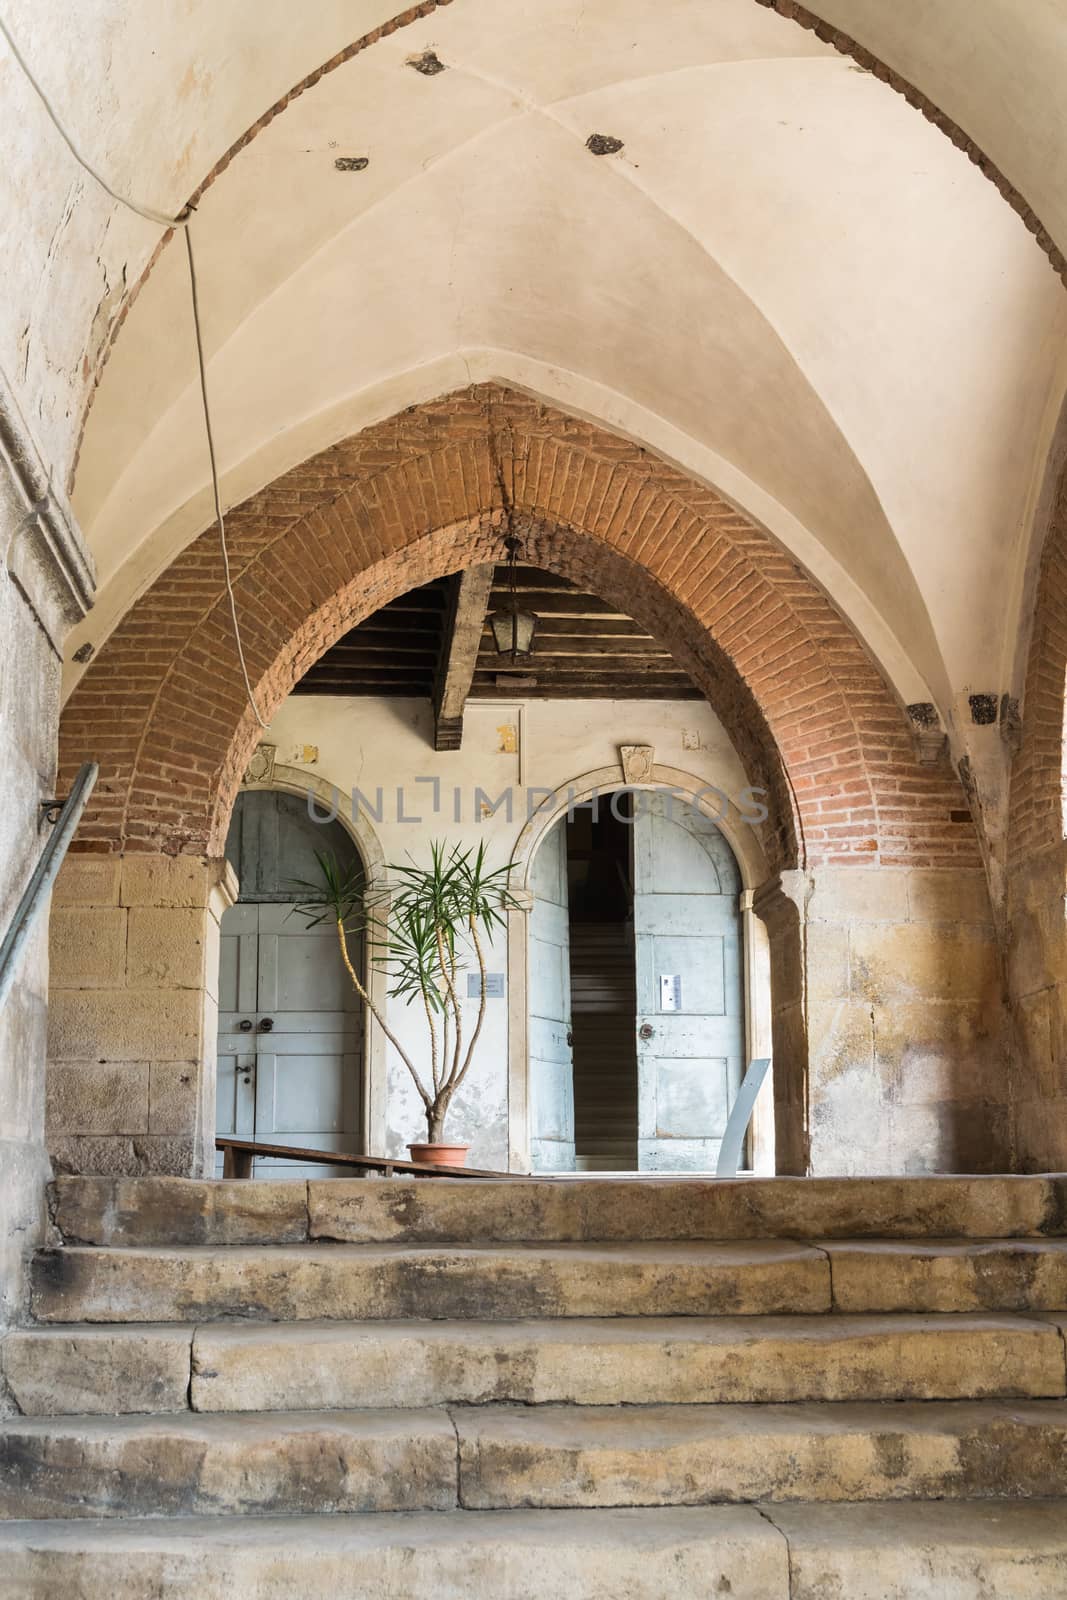 Brick pointed arch in a former Benedictine monastery.